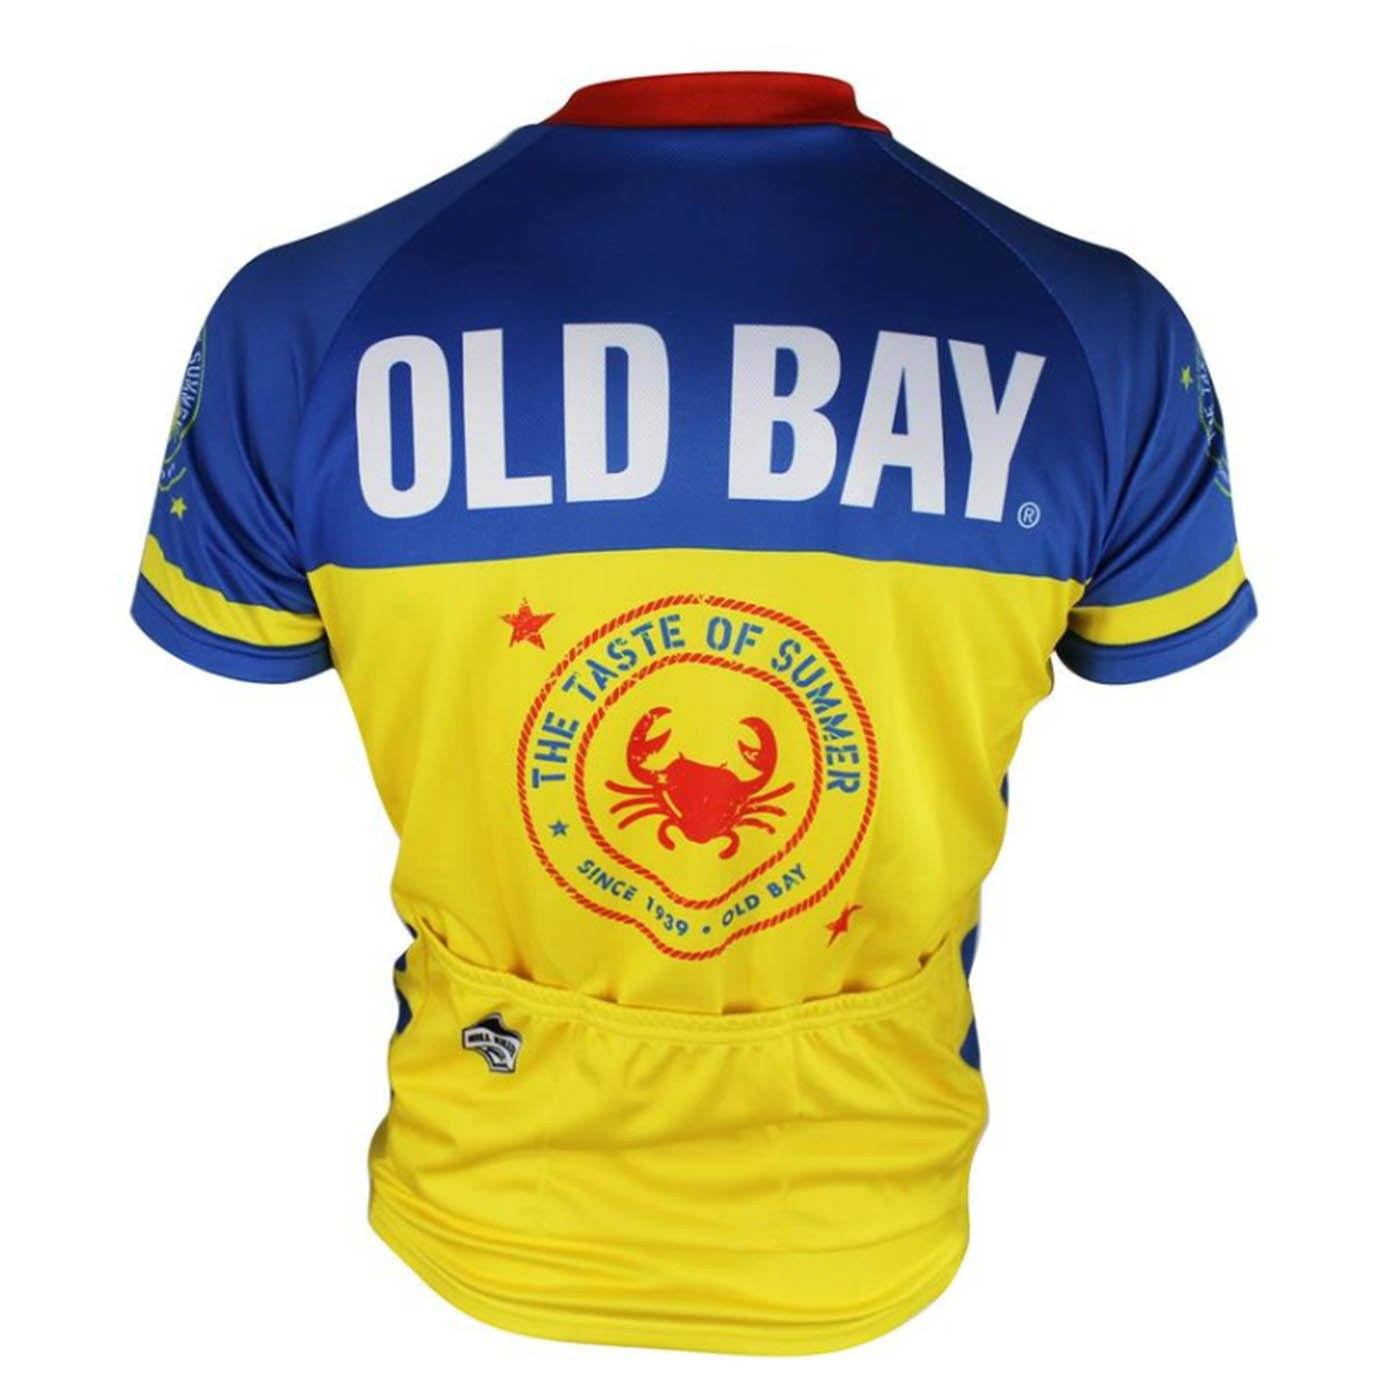 Old Bay / Cycling Jersey (Youth) - Route One Apparel